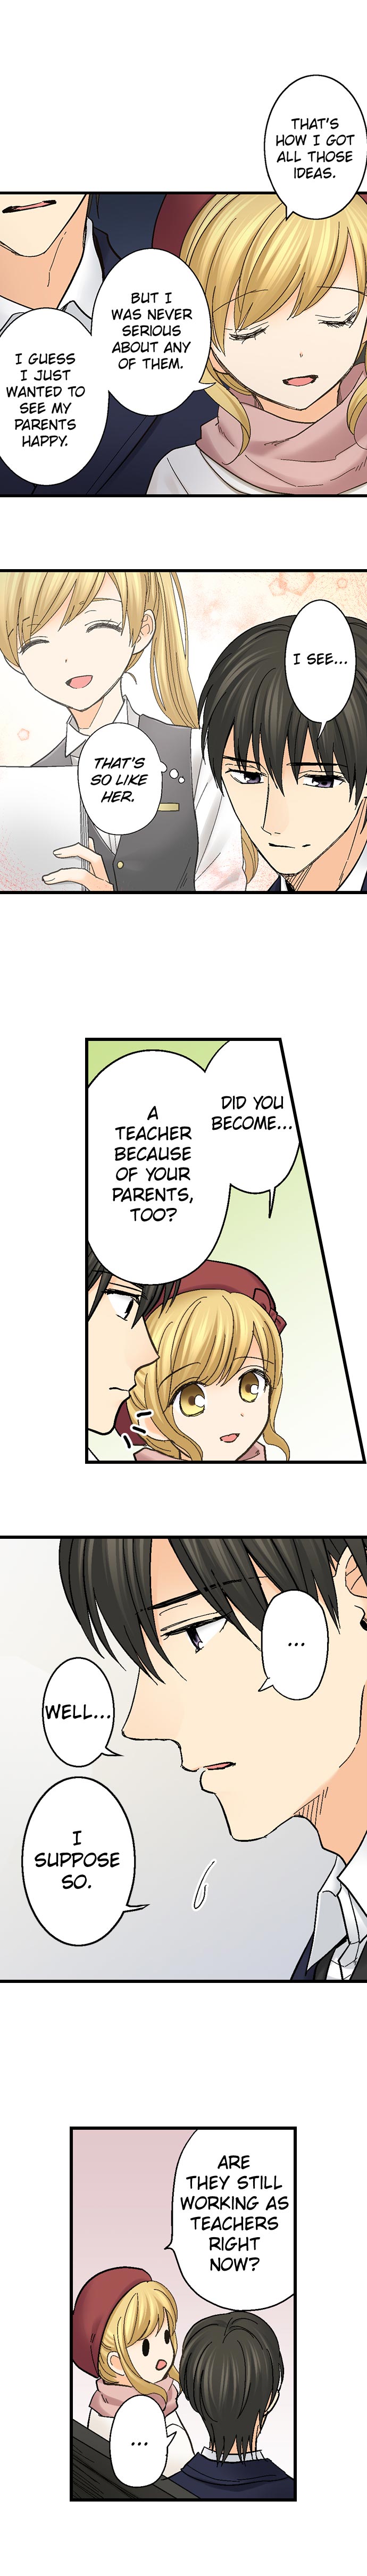 Running a Love Hotel with My Math Teacher - Chapter 104 Page 4